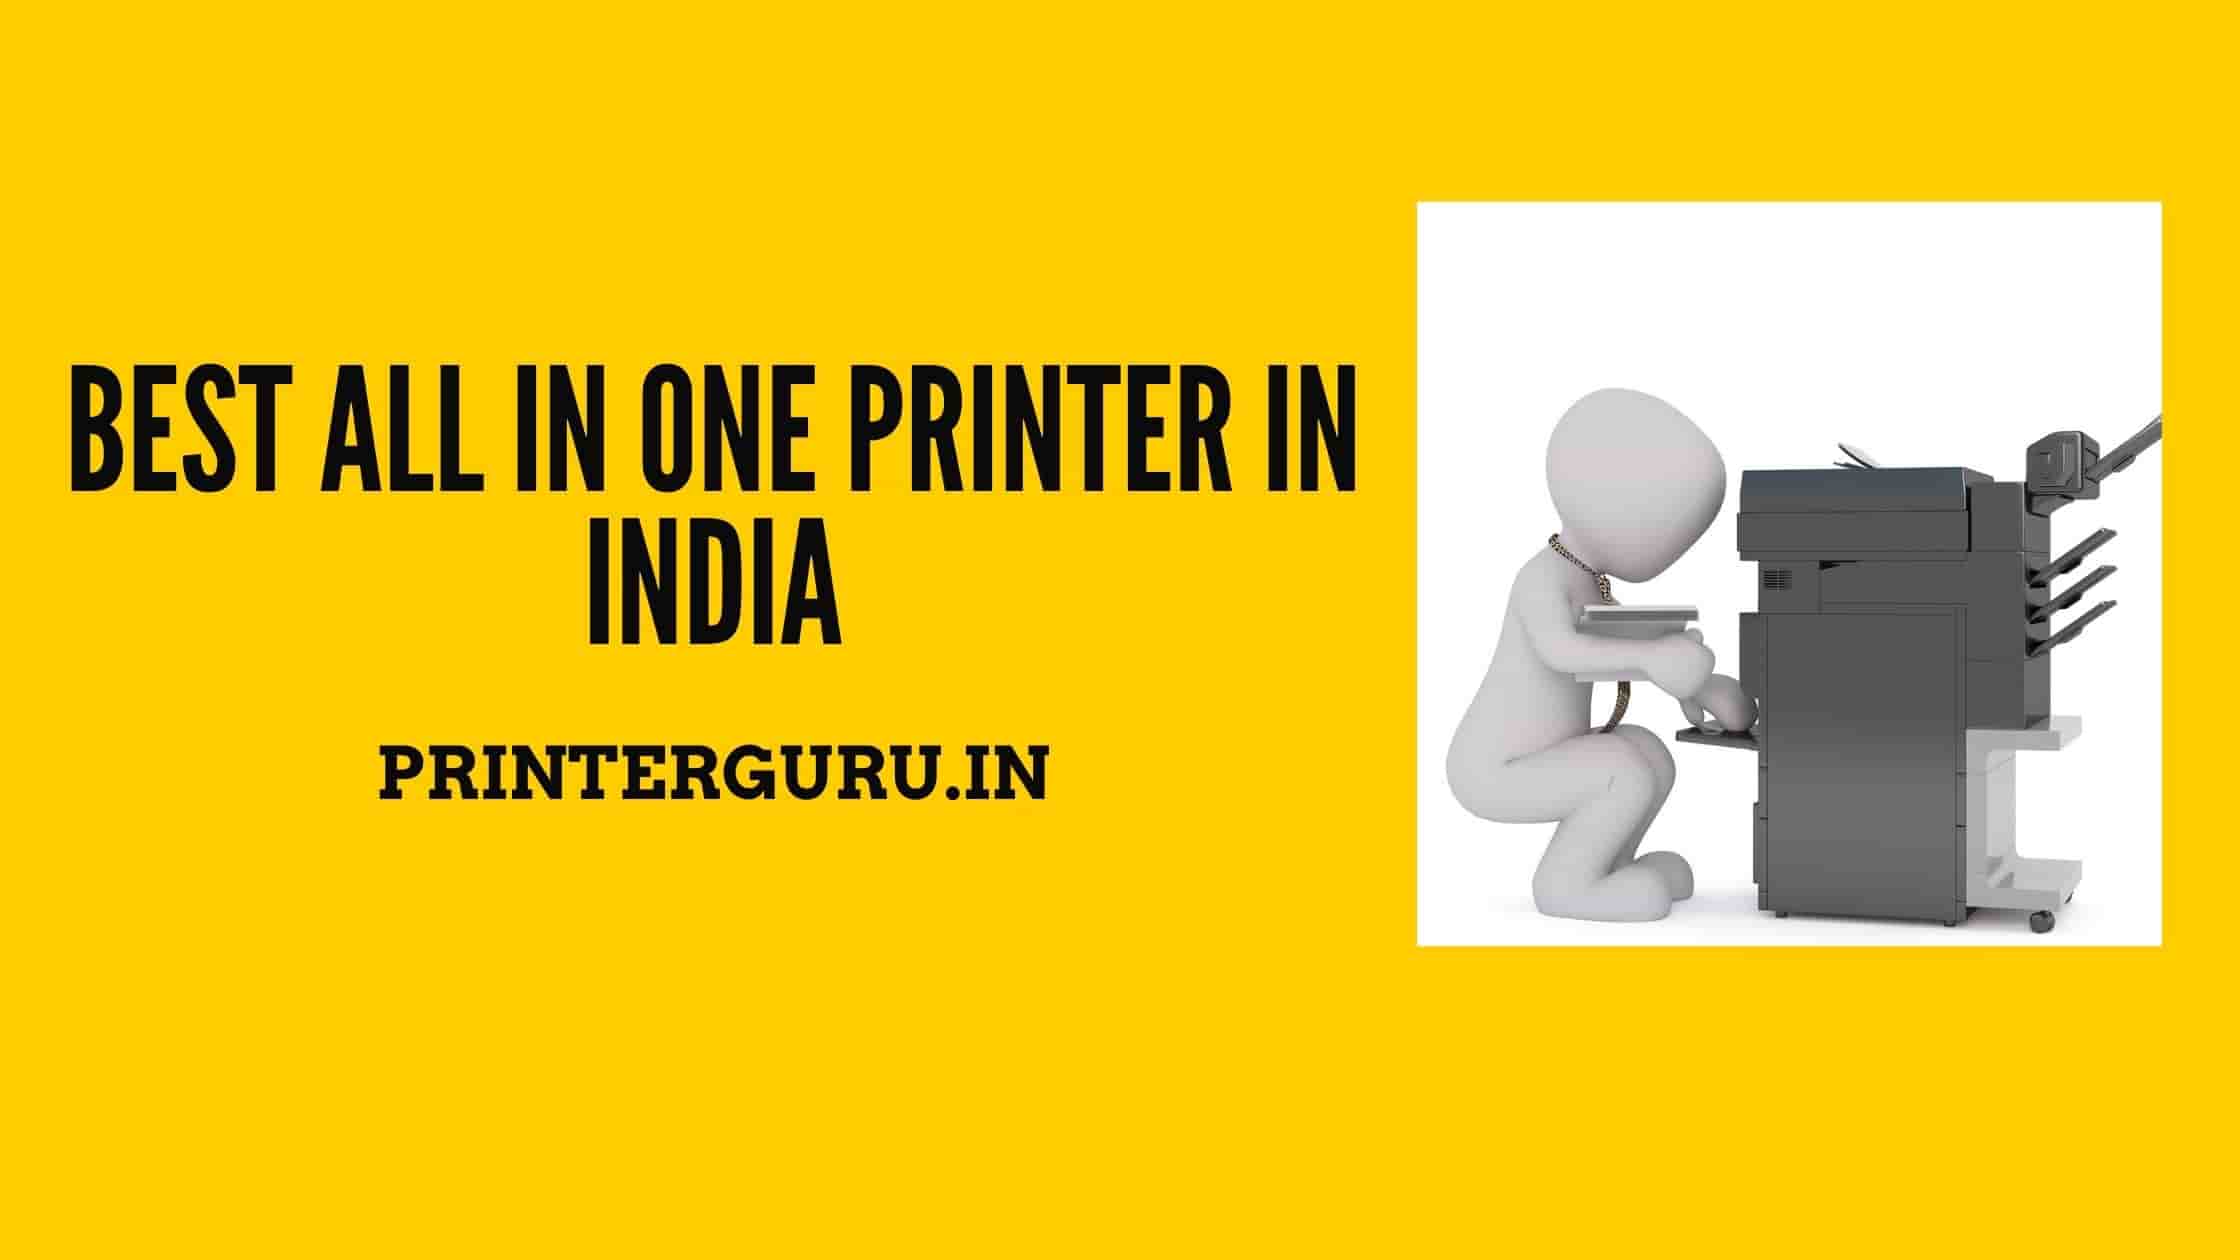 Best All In One Printer in India